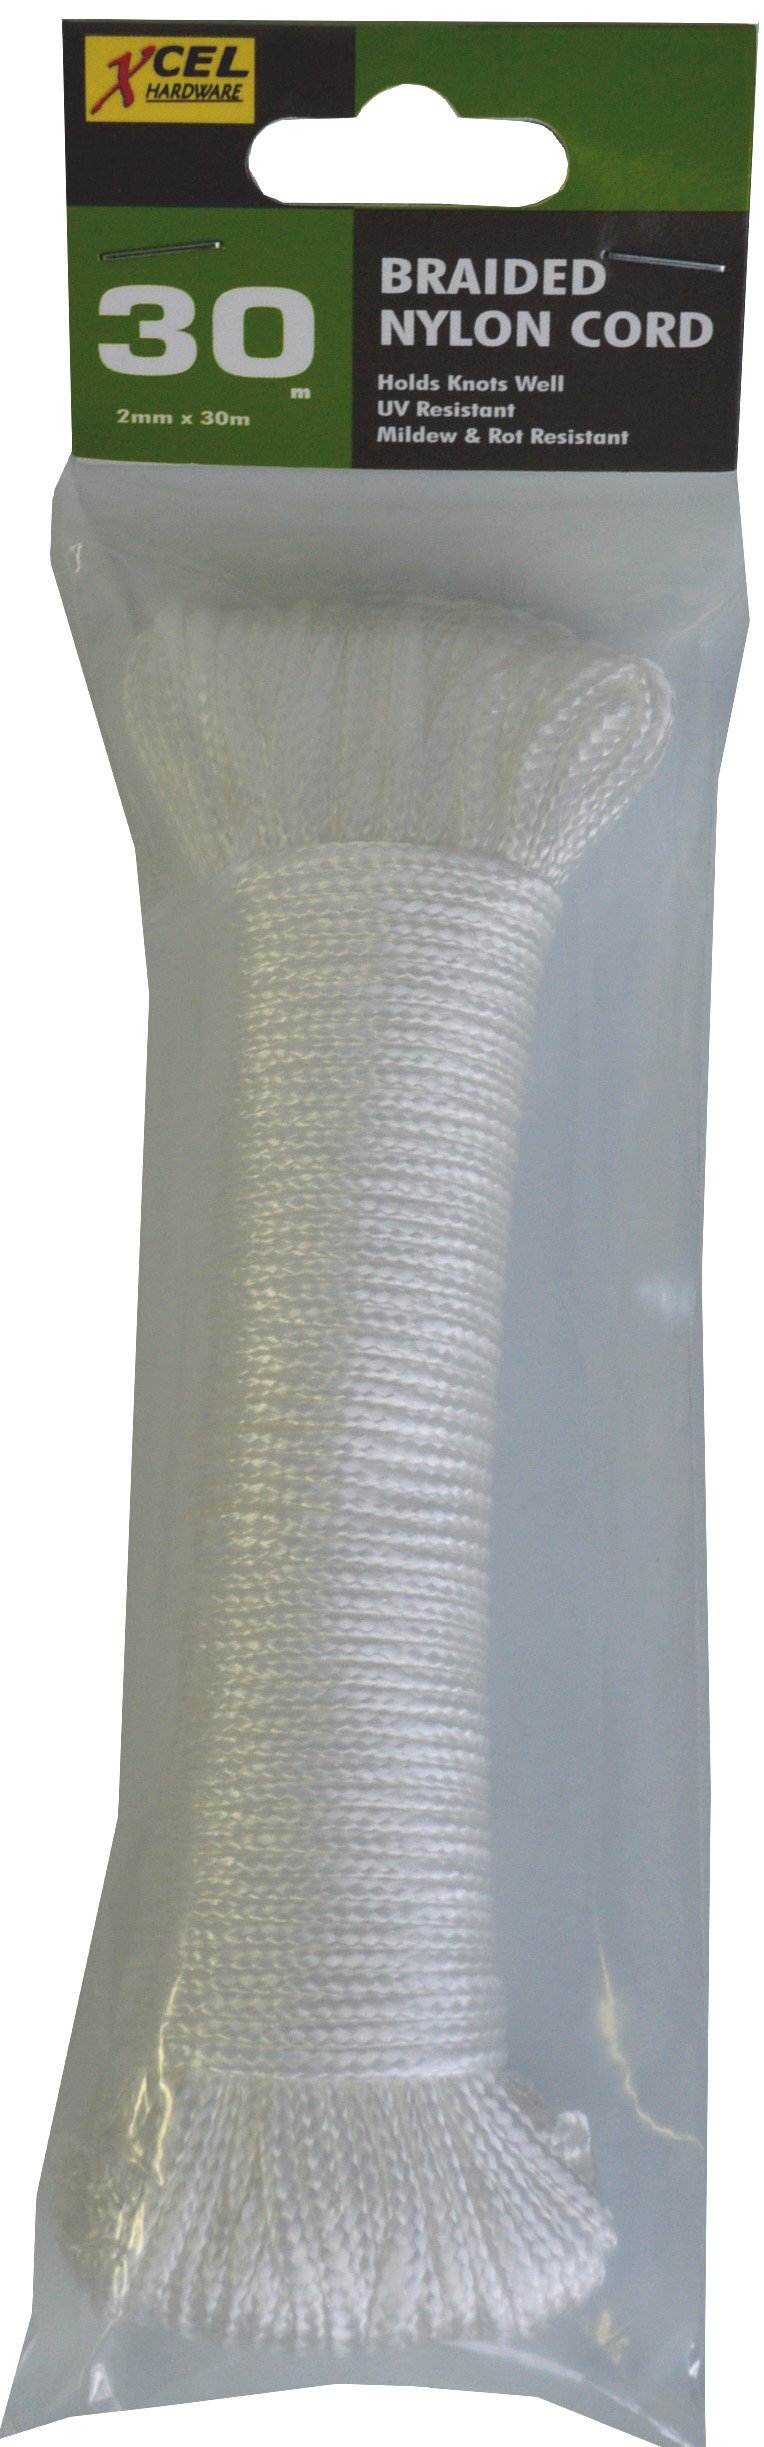 Braided Nylon Cord 30m White in Polybag 2mm Xcel